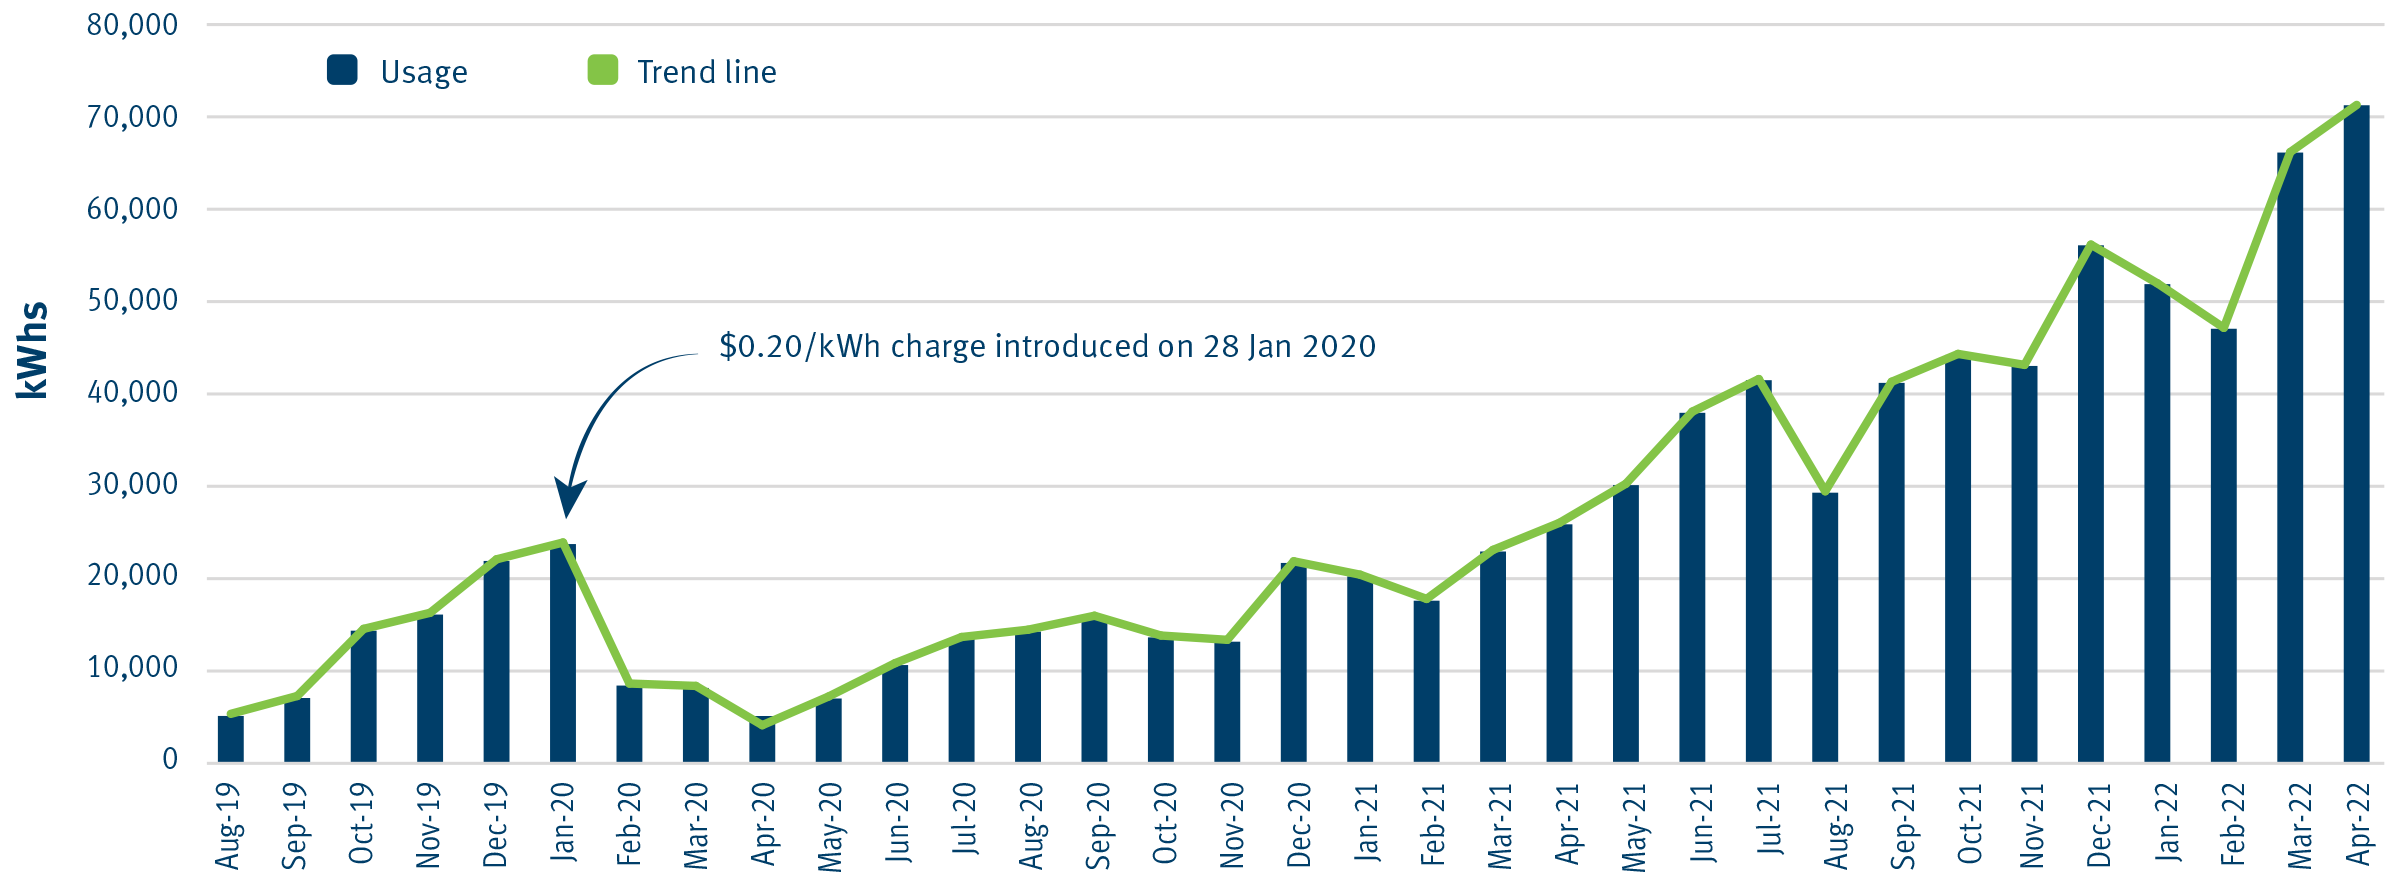 Graph showing increasing usage of the Queensland electric super highway from 5.210 kWh in August 2019 to 71,774 kWh in April 2022.